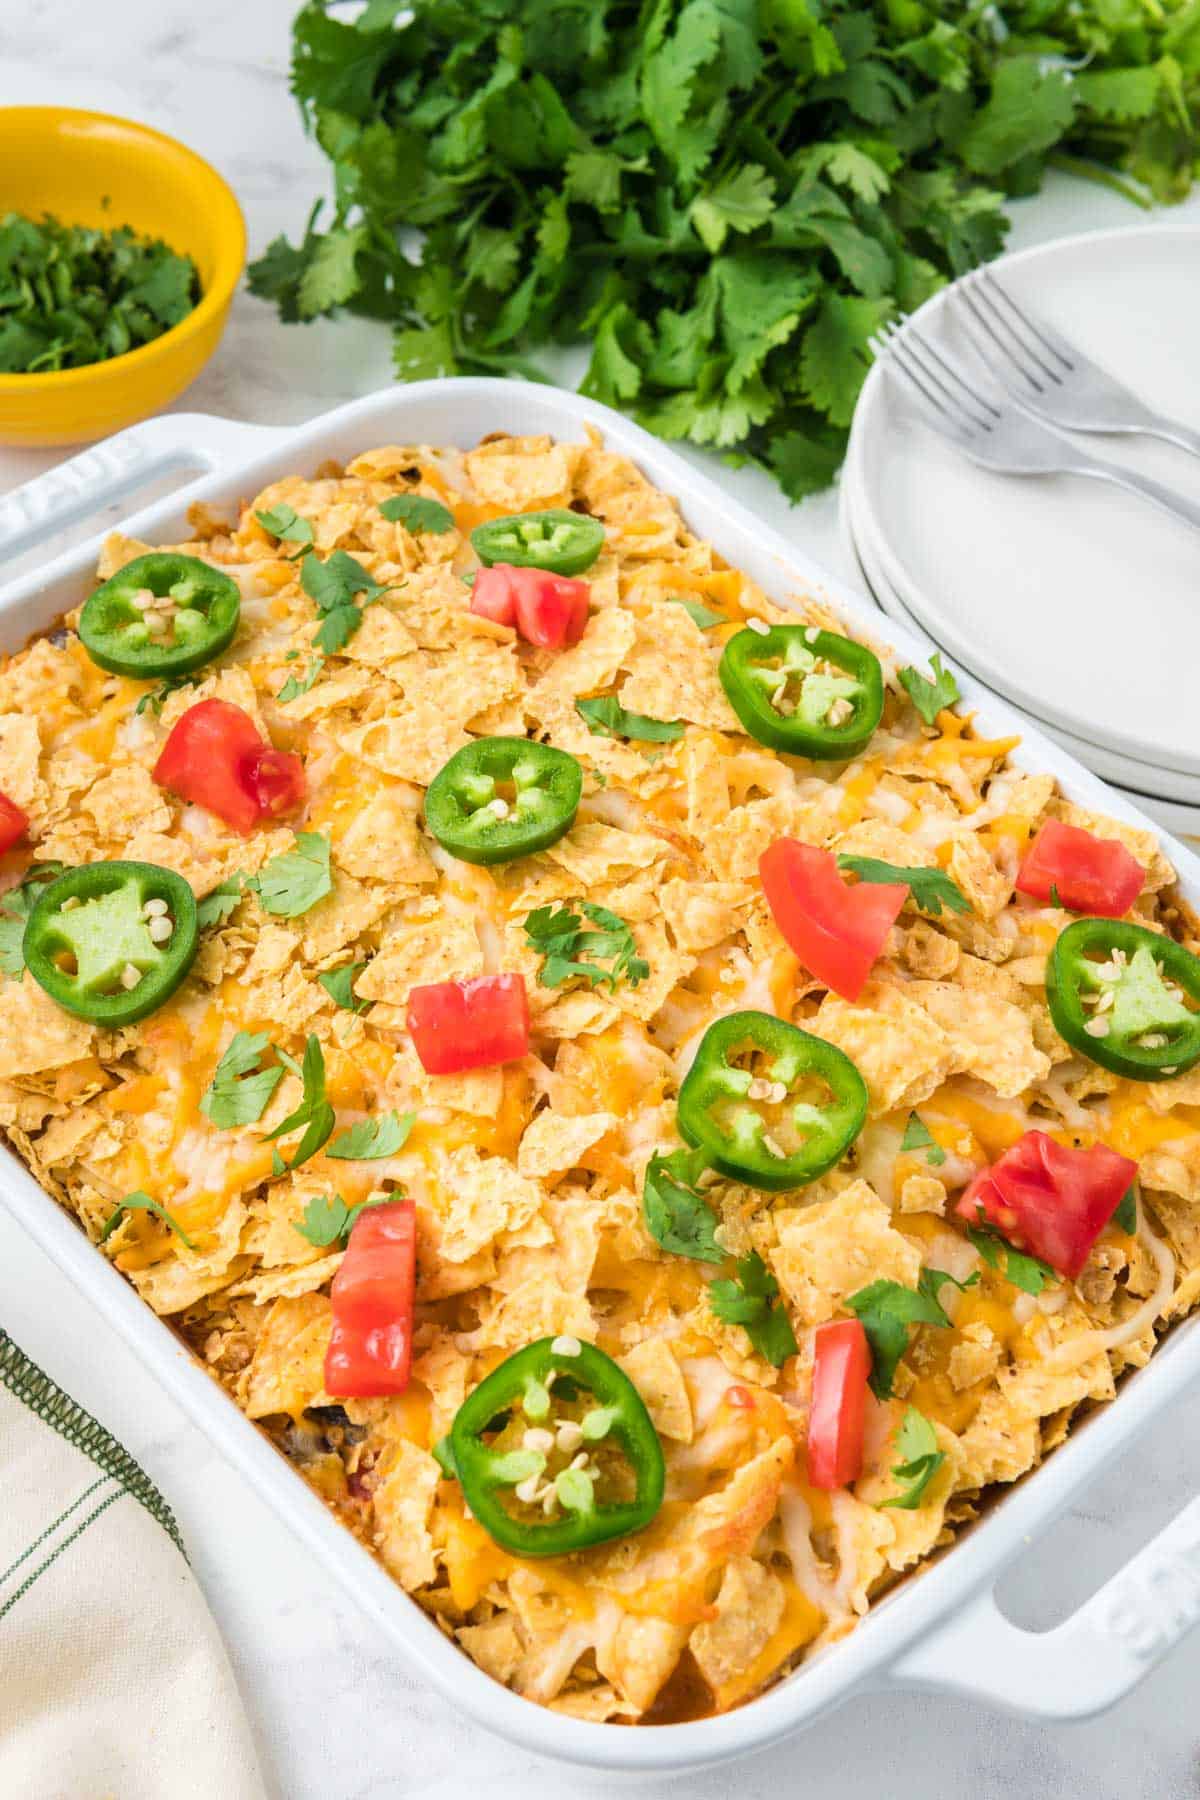 Chicken taco casserole in a white casserole dish with jalapeno slices and tomatoes on top.